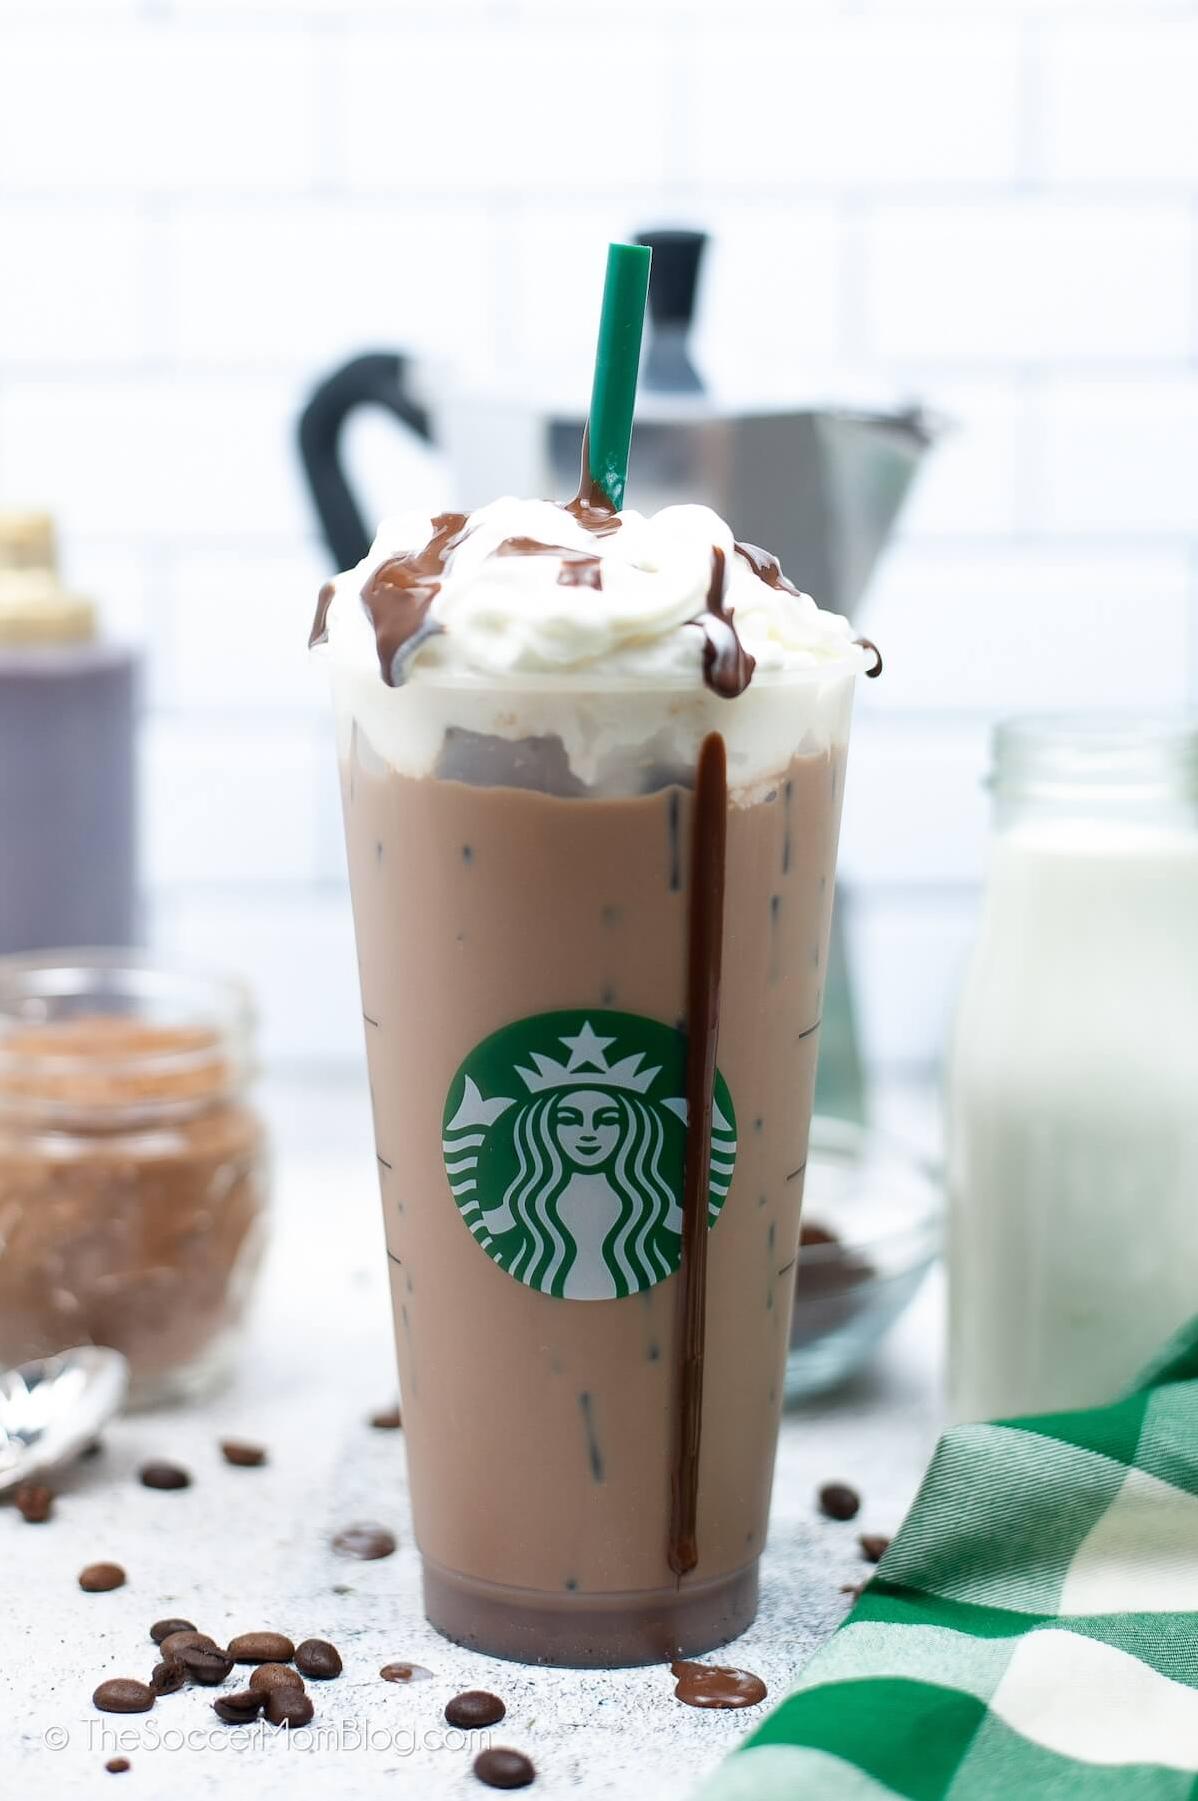  This decadent iced mocha will rock your world without ruining your diet.